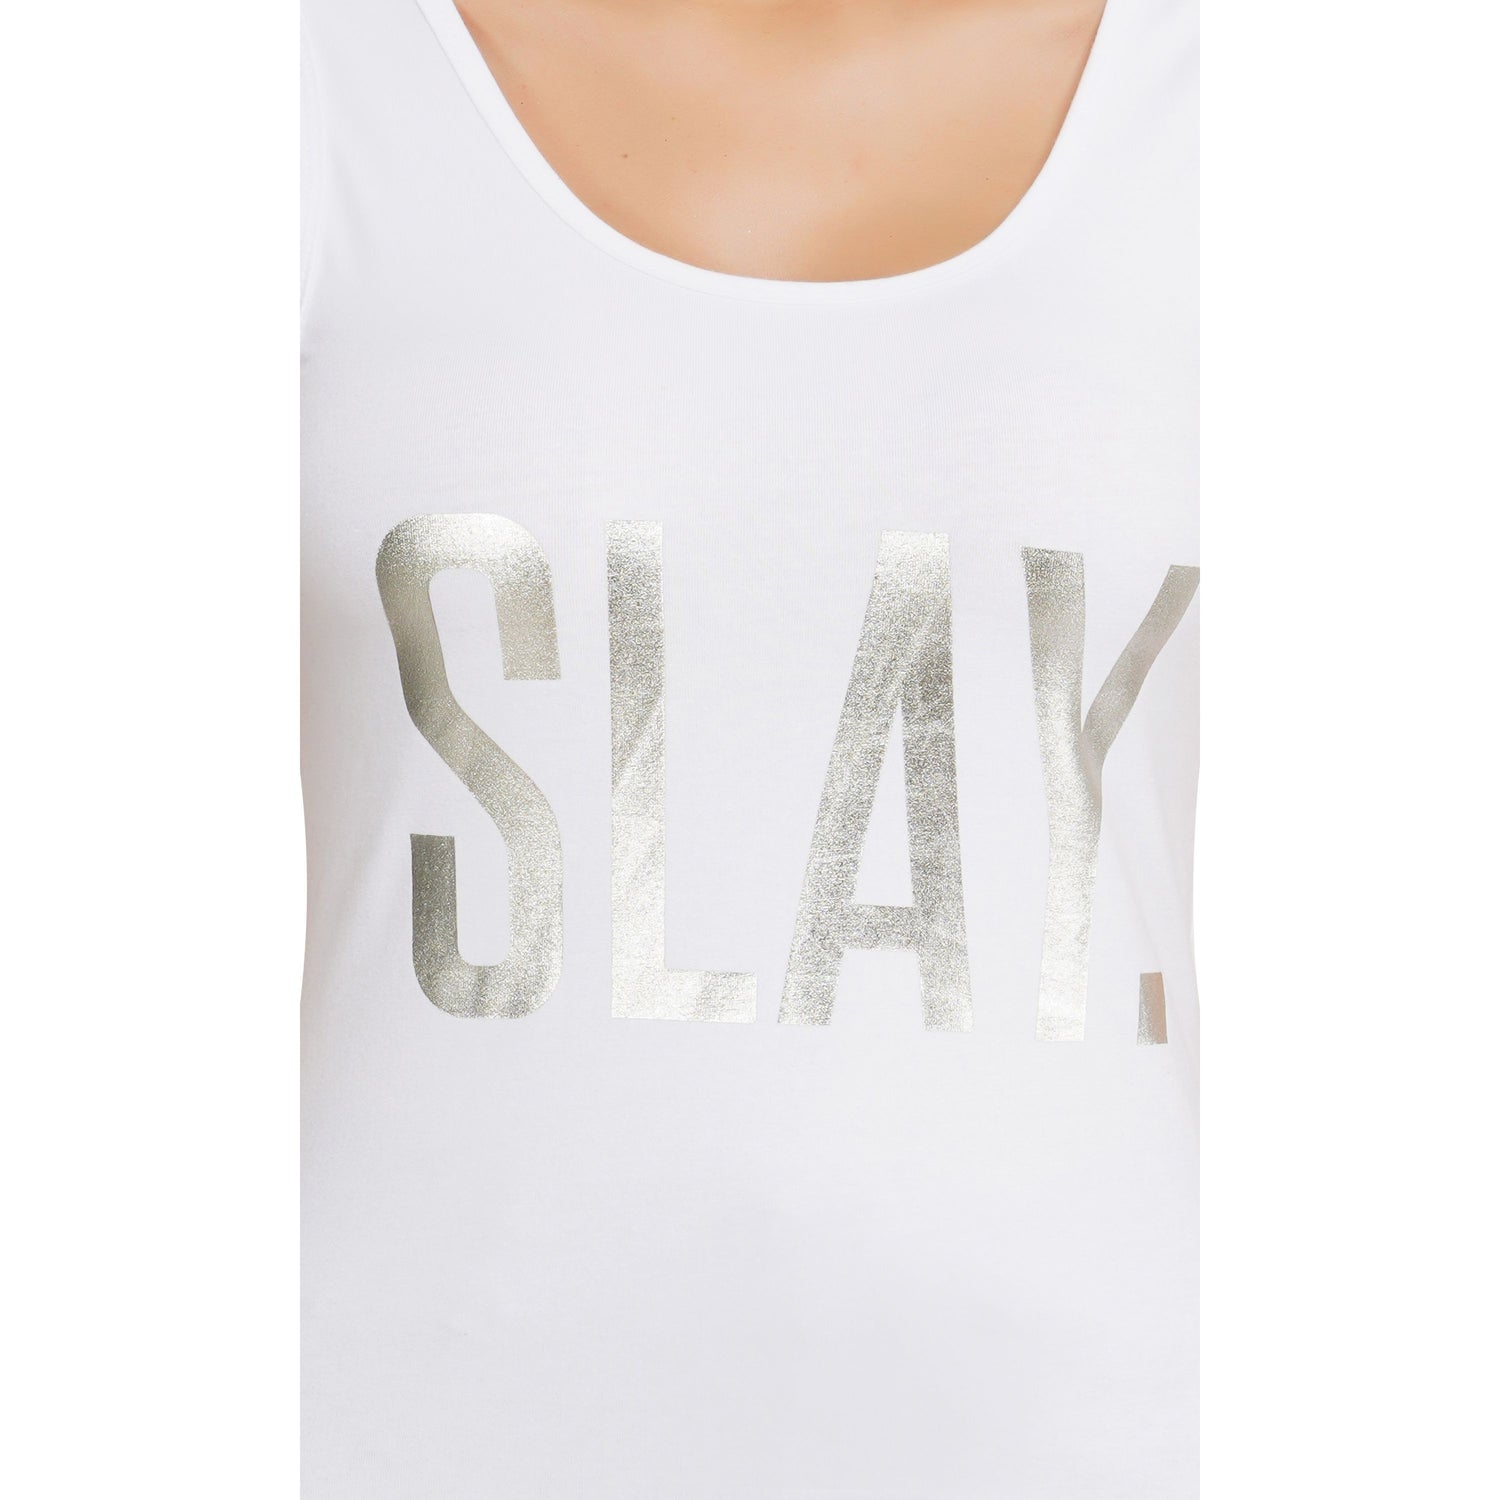 SLAY. Women's Limited Edition Silver Foil Printed Tank Top - Reflective Print-clothing-to-slay.myshopify.com-Tank Top